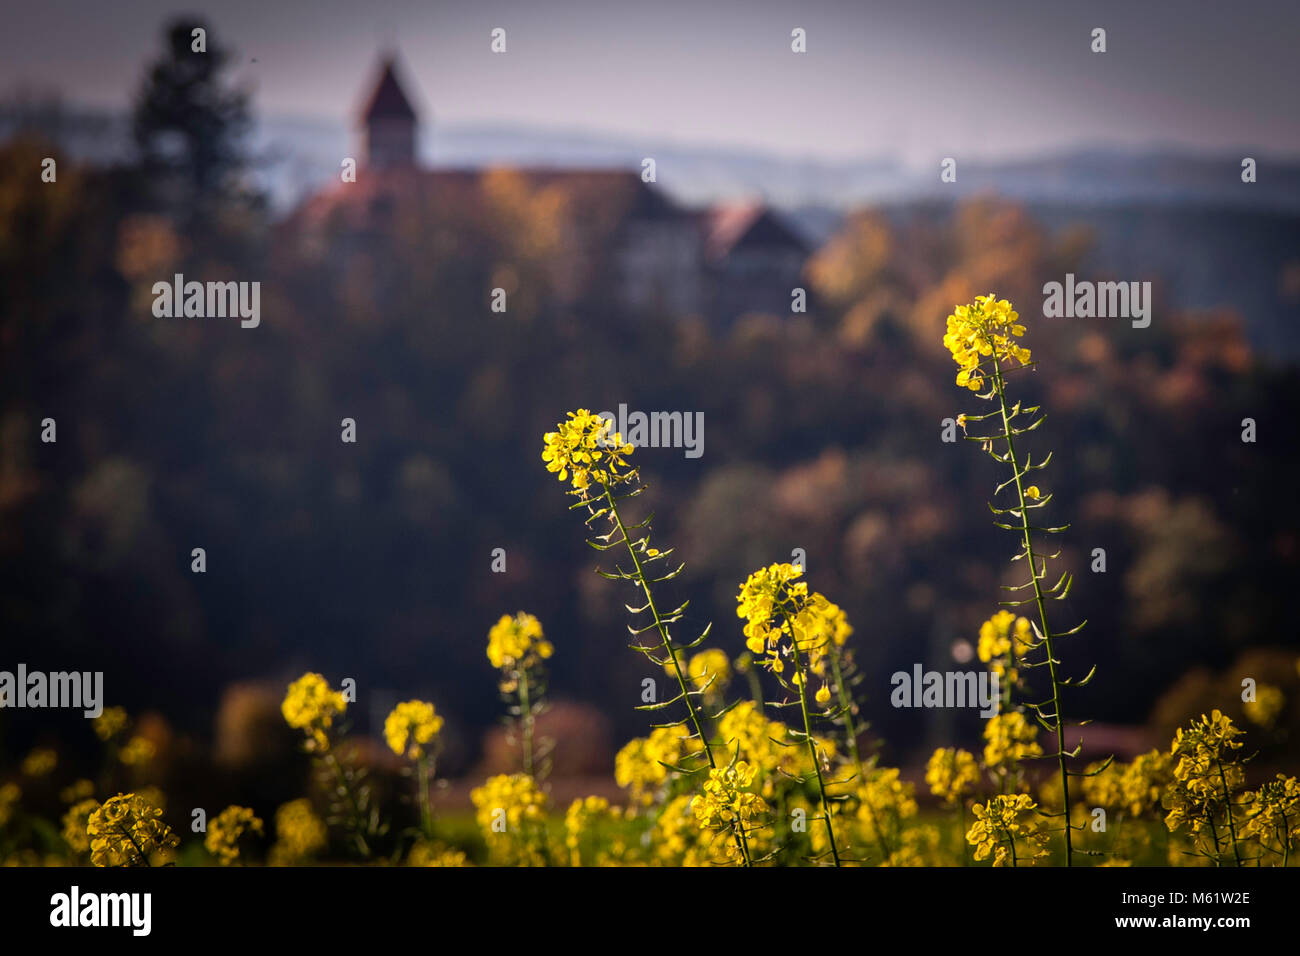 Burg Wernberg German castle in Bavaria with fields and woods Stock Photo